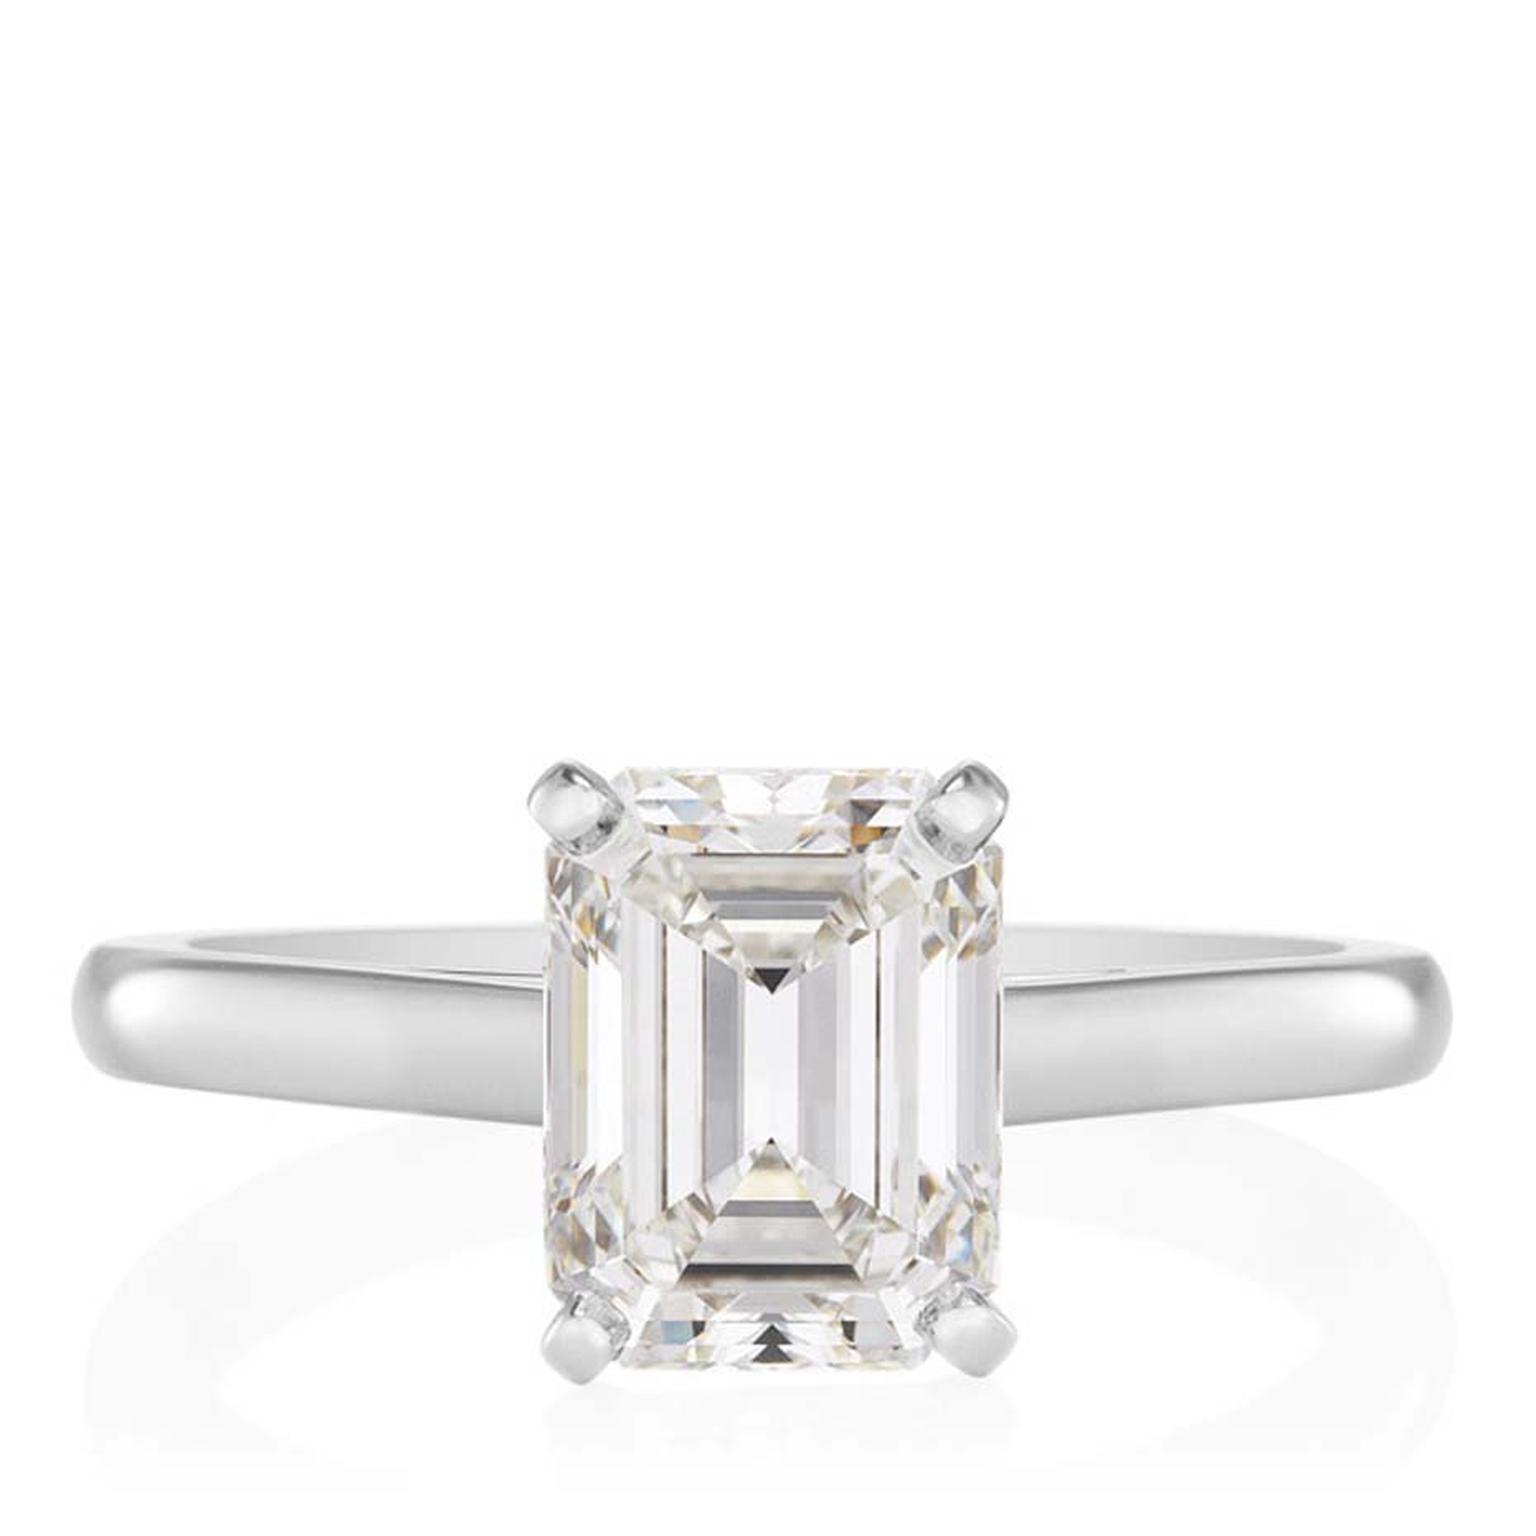 De Beers emerald-cut diamond solitaire engagement ring (from £2,650).